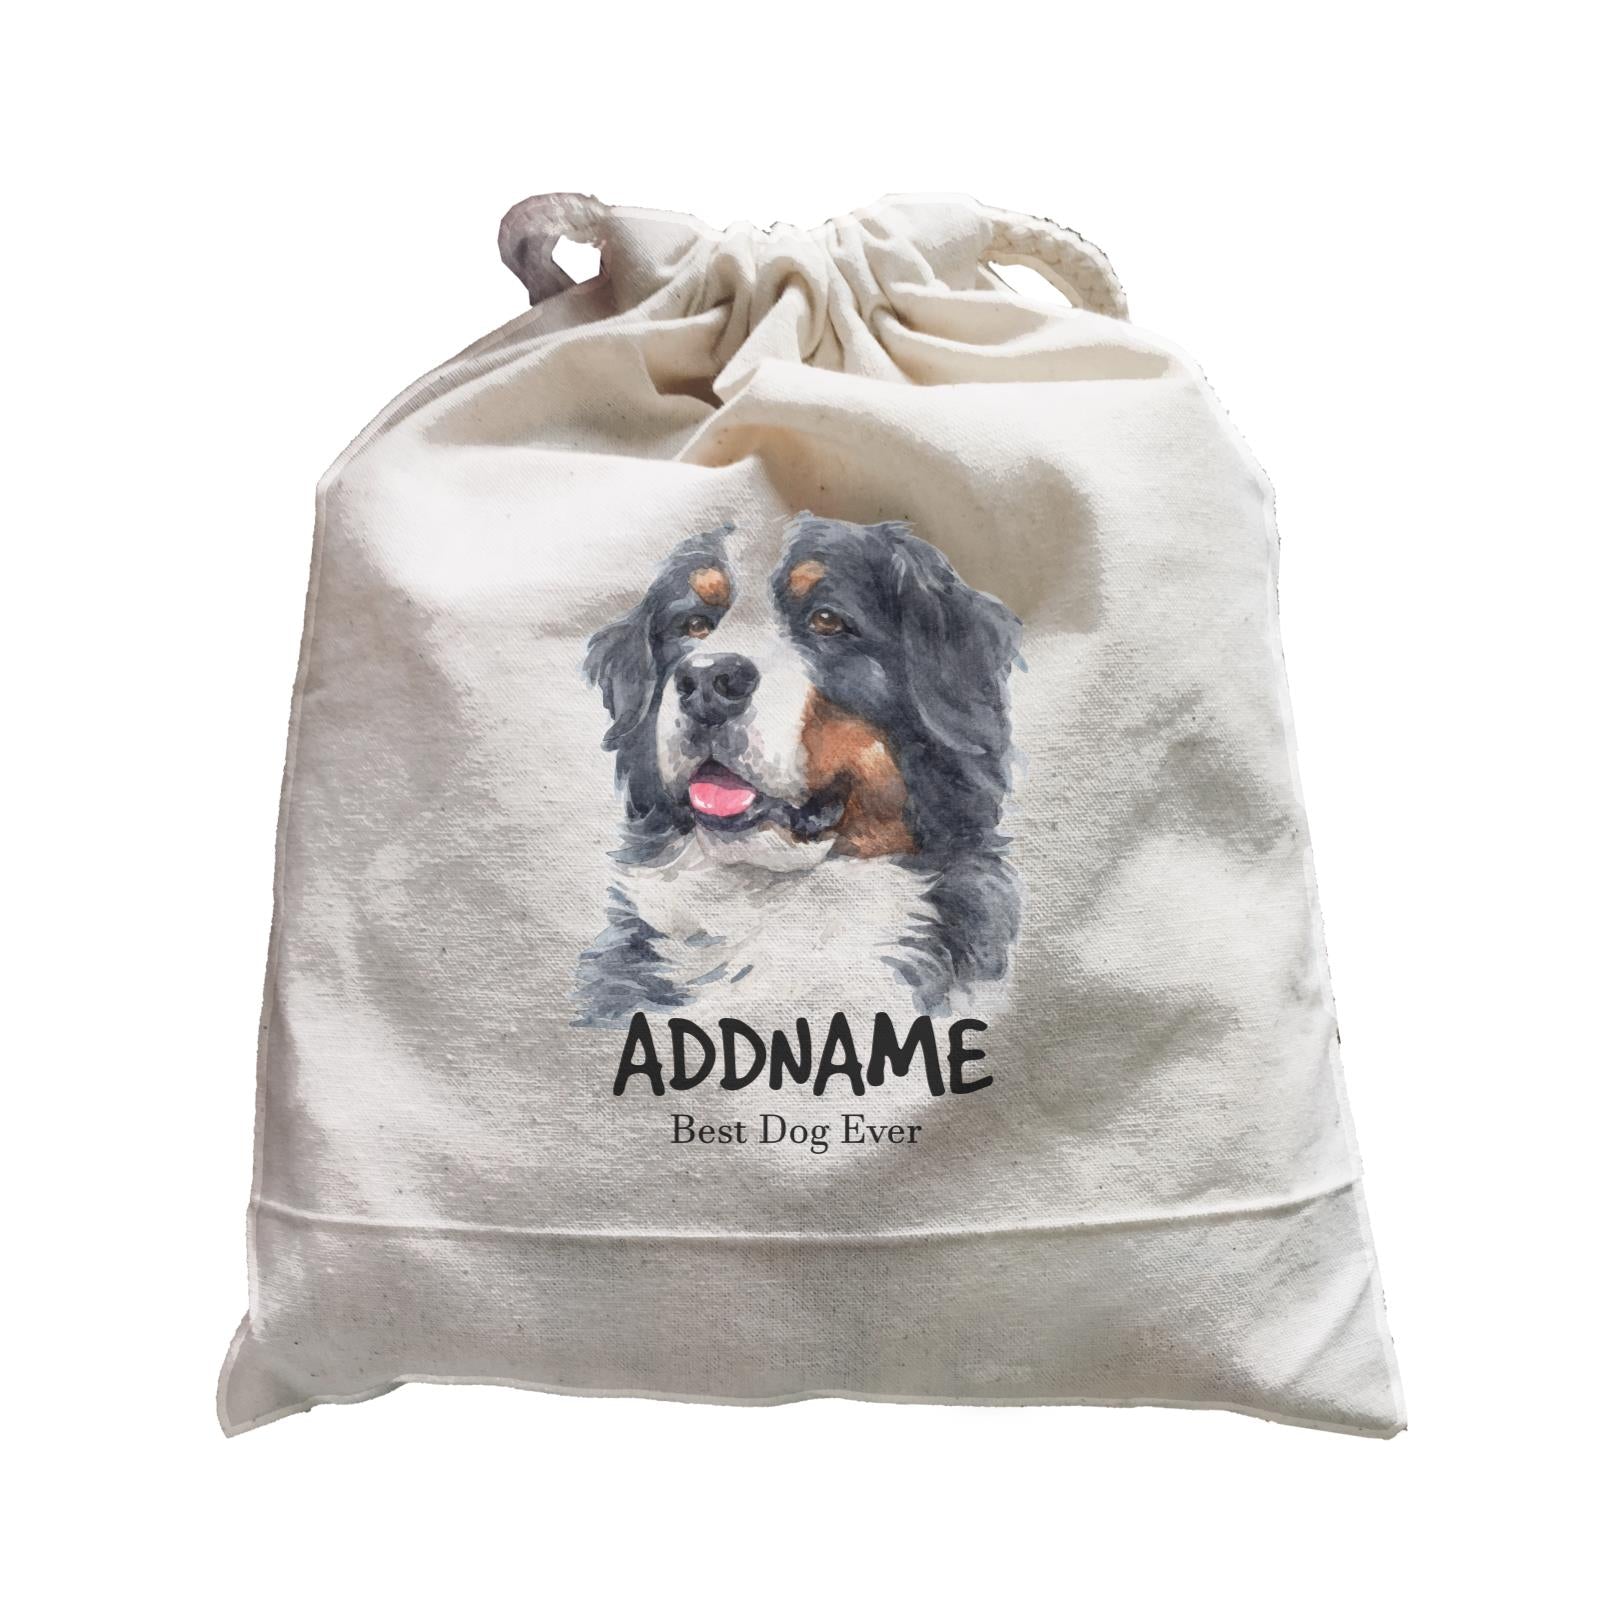 Watercolor Dog Bernese Mountain Best Dog Ever Addname Satchel